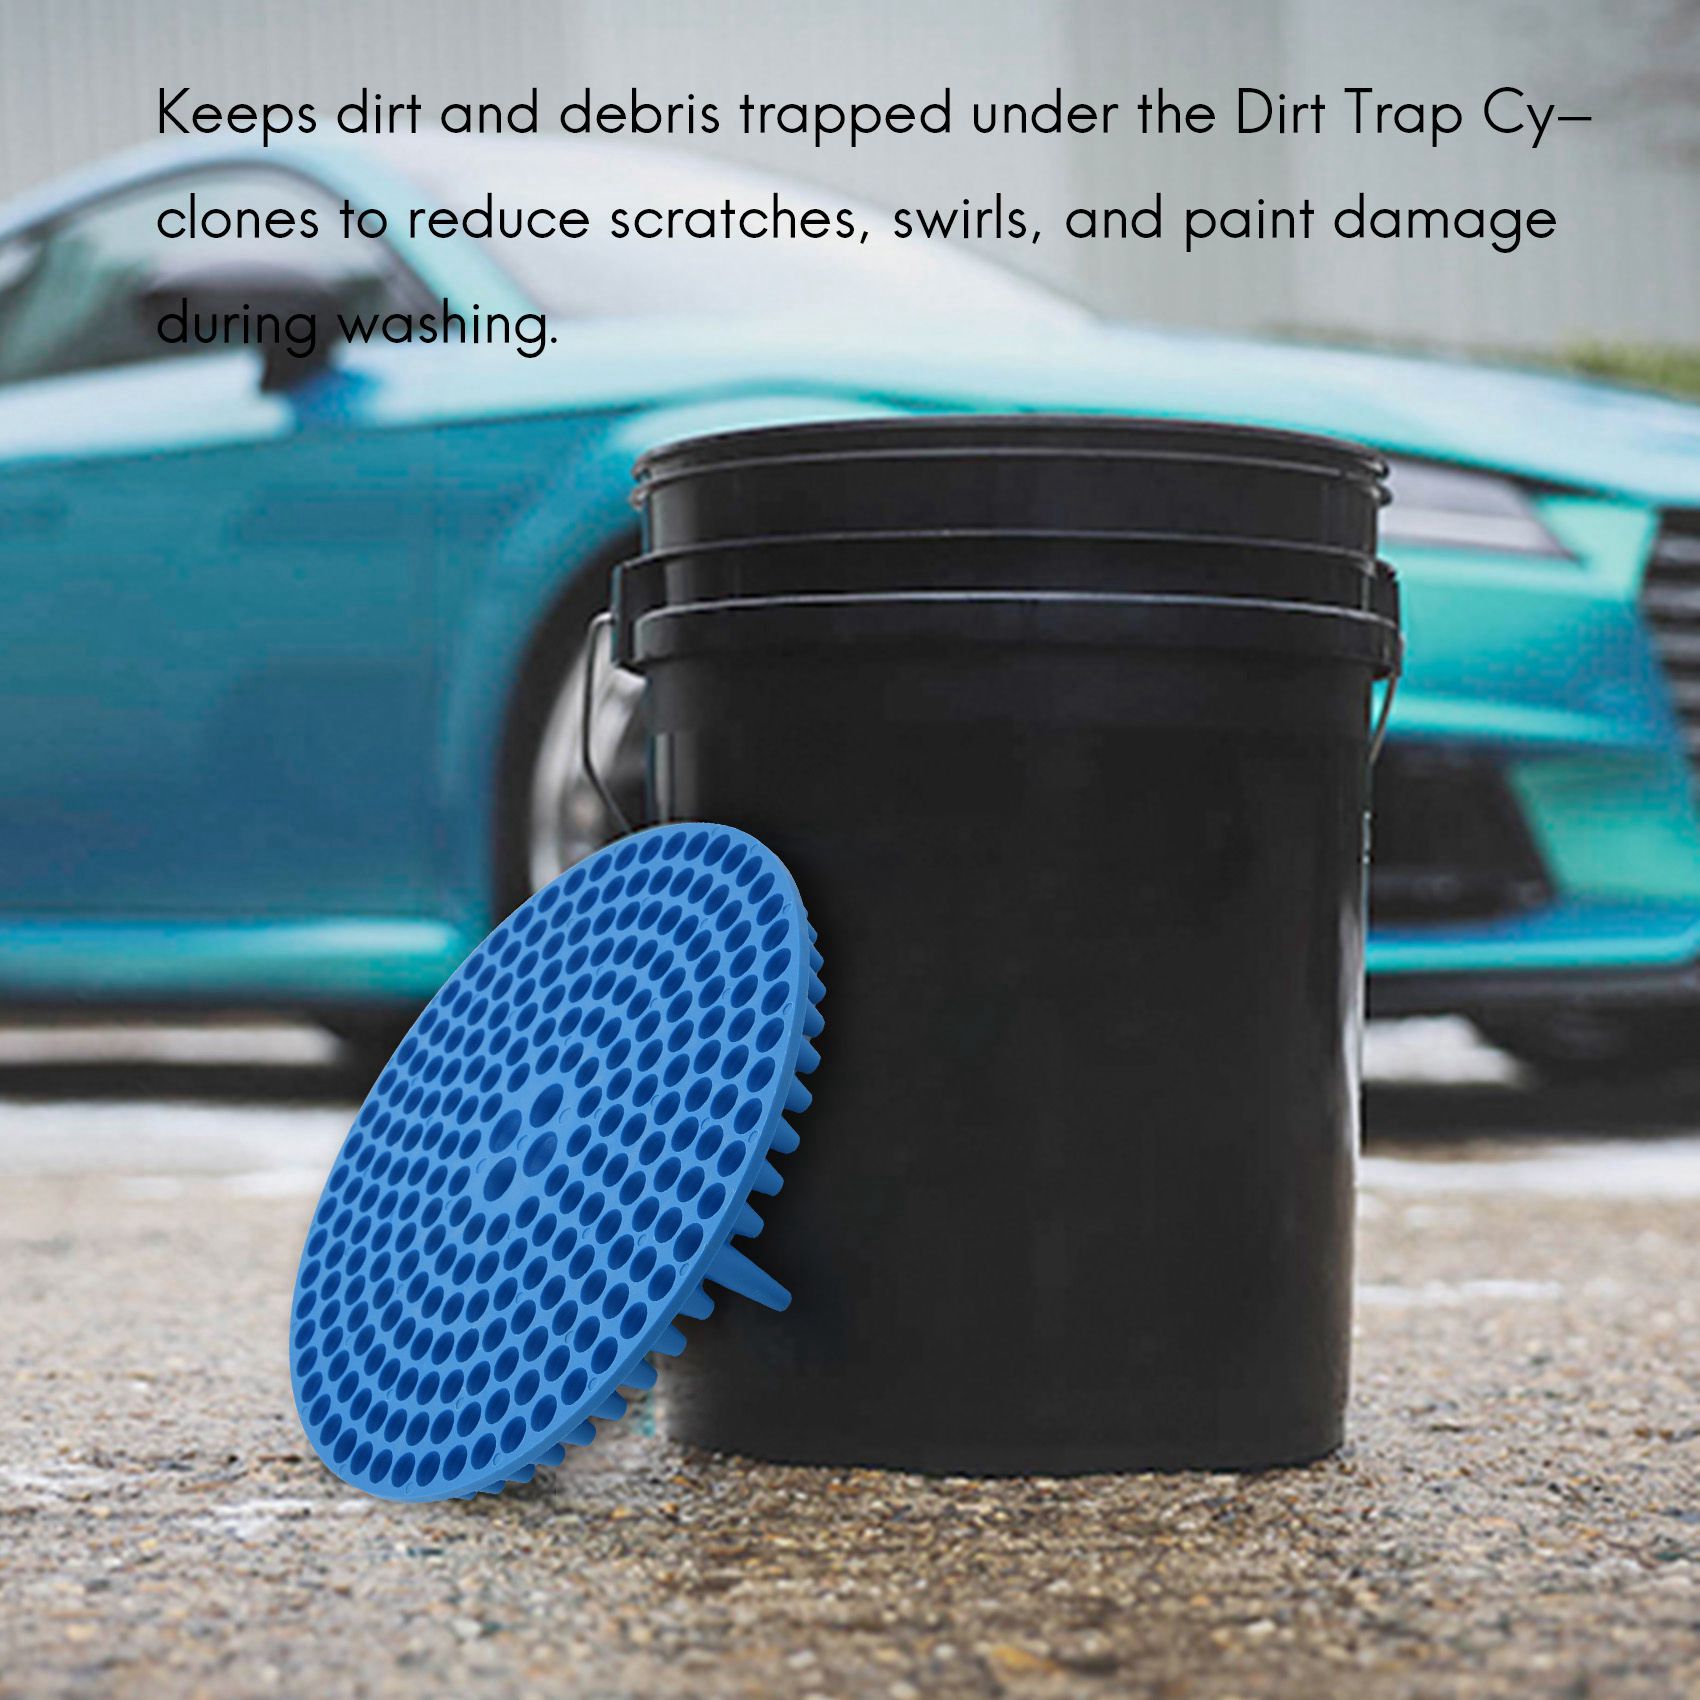 23.5cm Dirt Trap Car Wash Bucket Insert Car Wash Filter Removes Dirt and  Debris While You Wash - Blue 